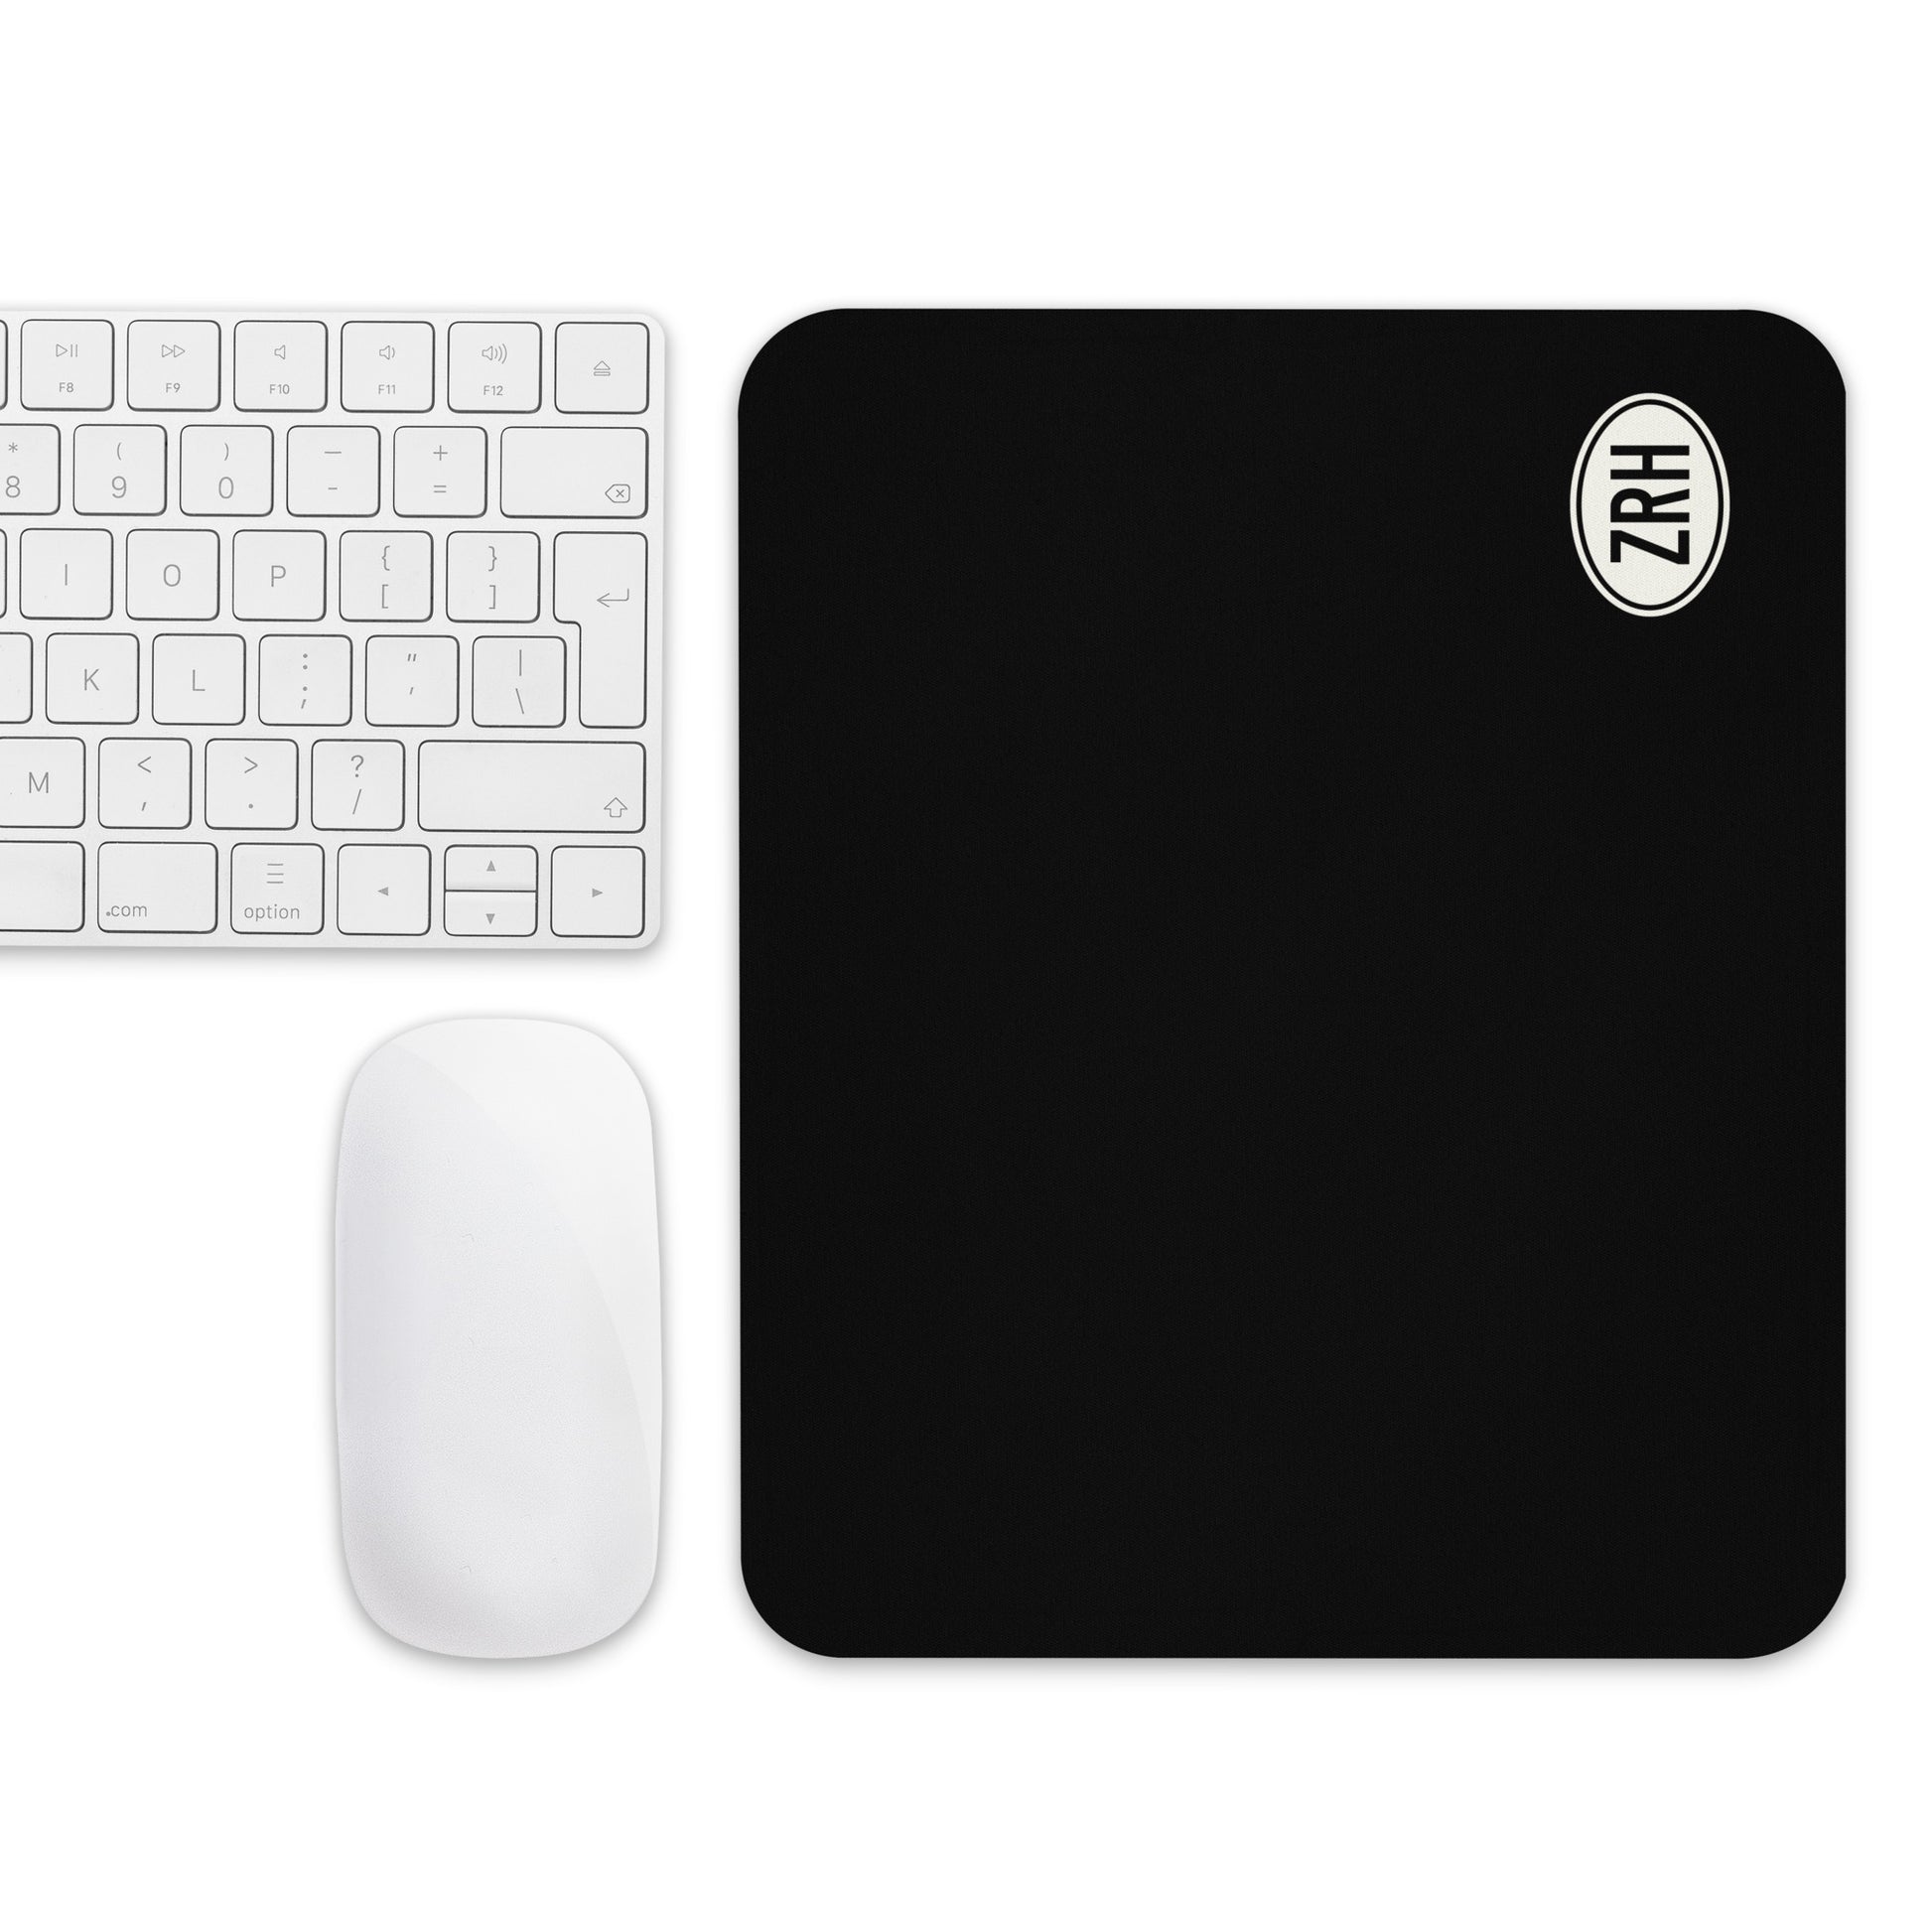 Unique Travel Gift Mouse Pad - White Oval • ZRH Zurich • YHM Designs - Image 04